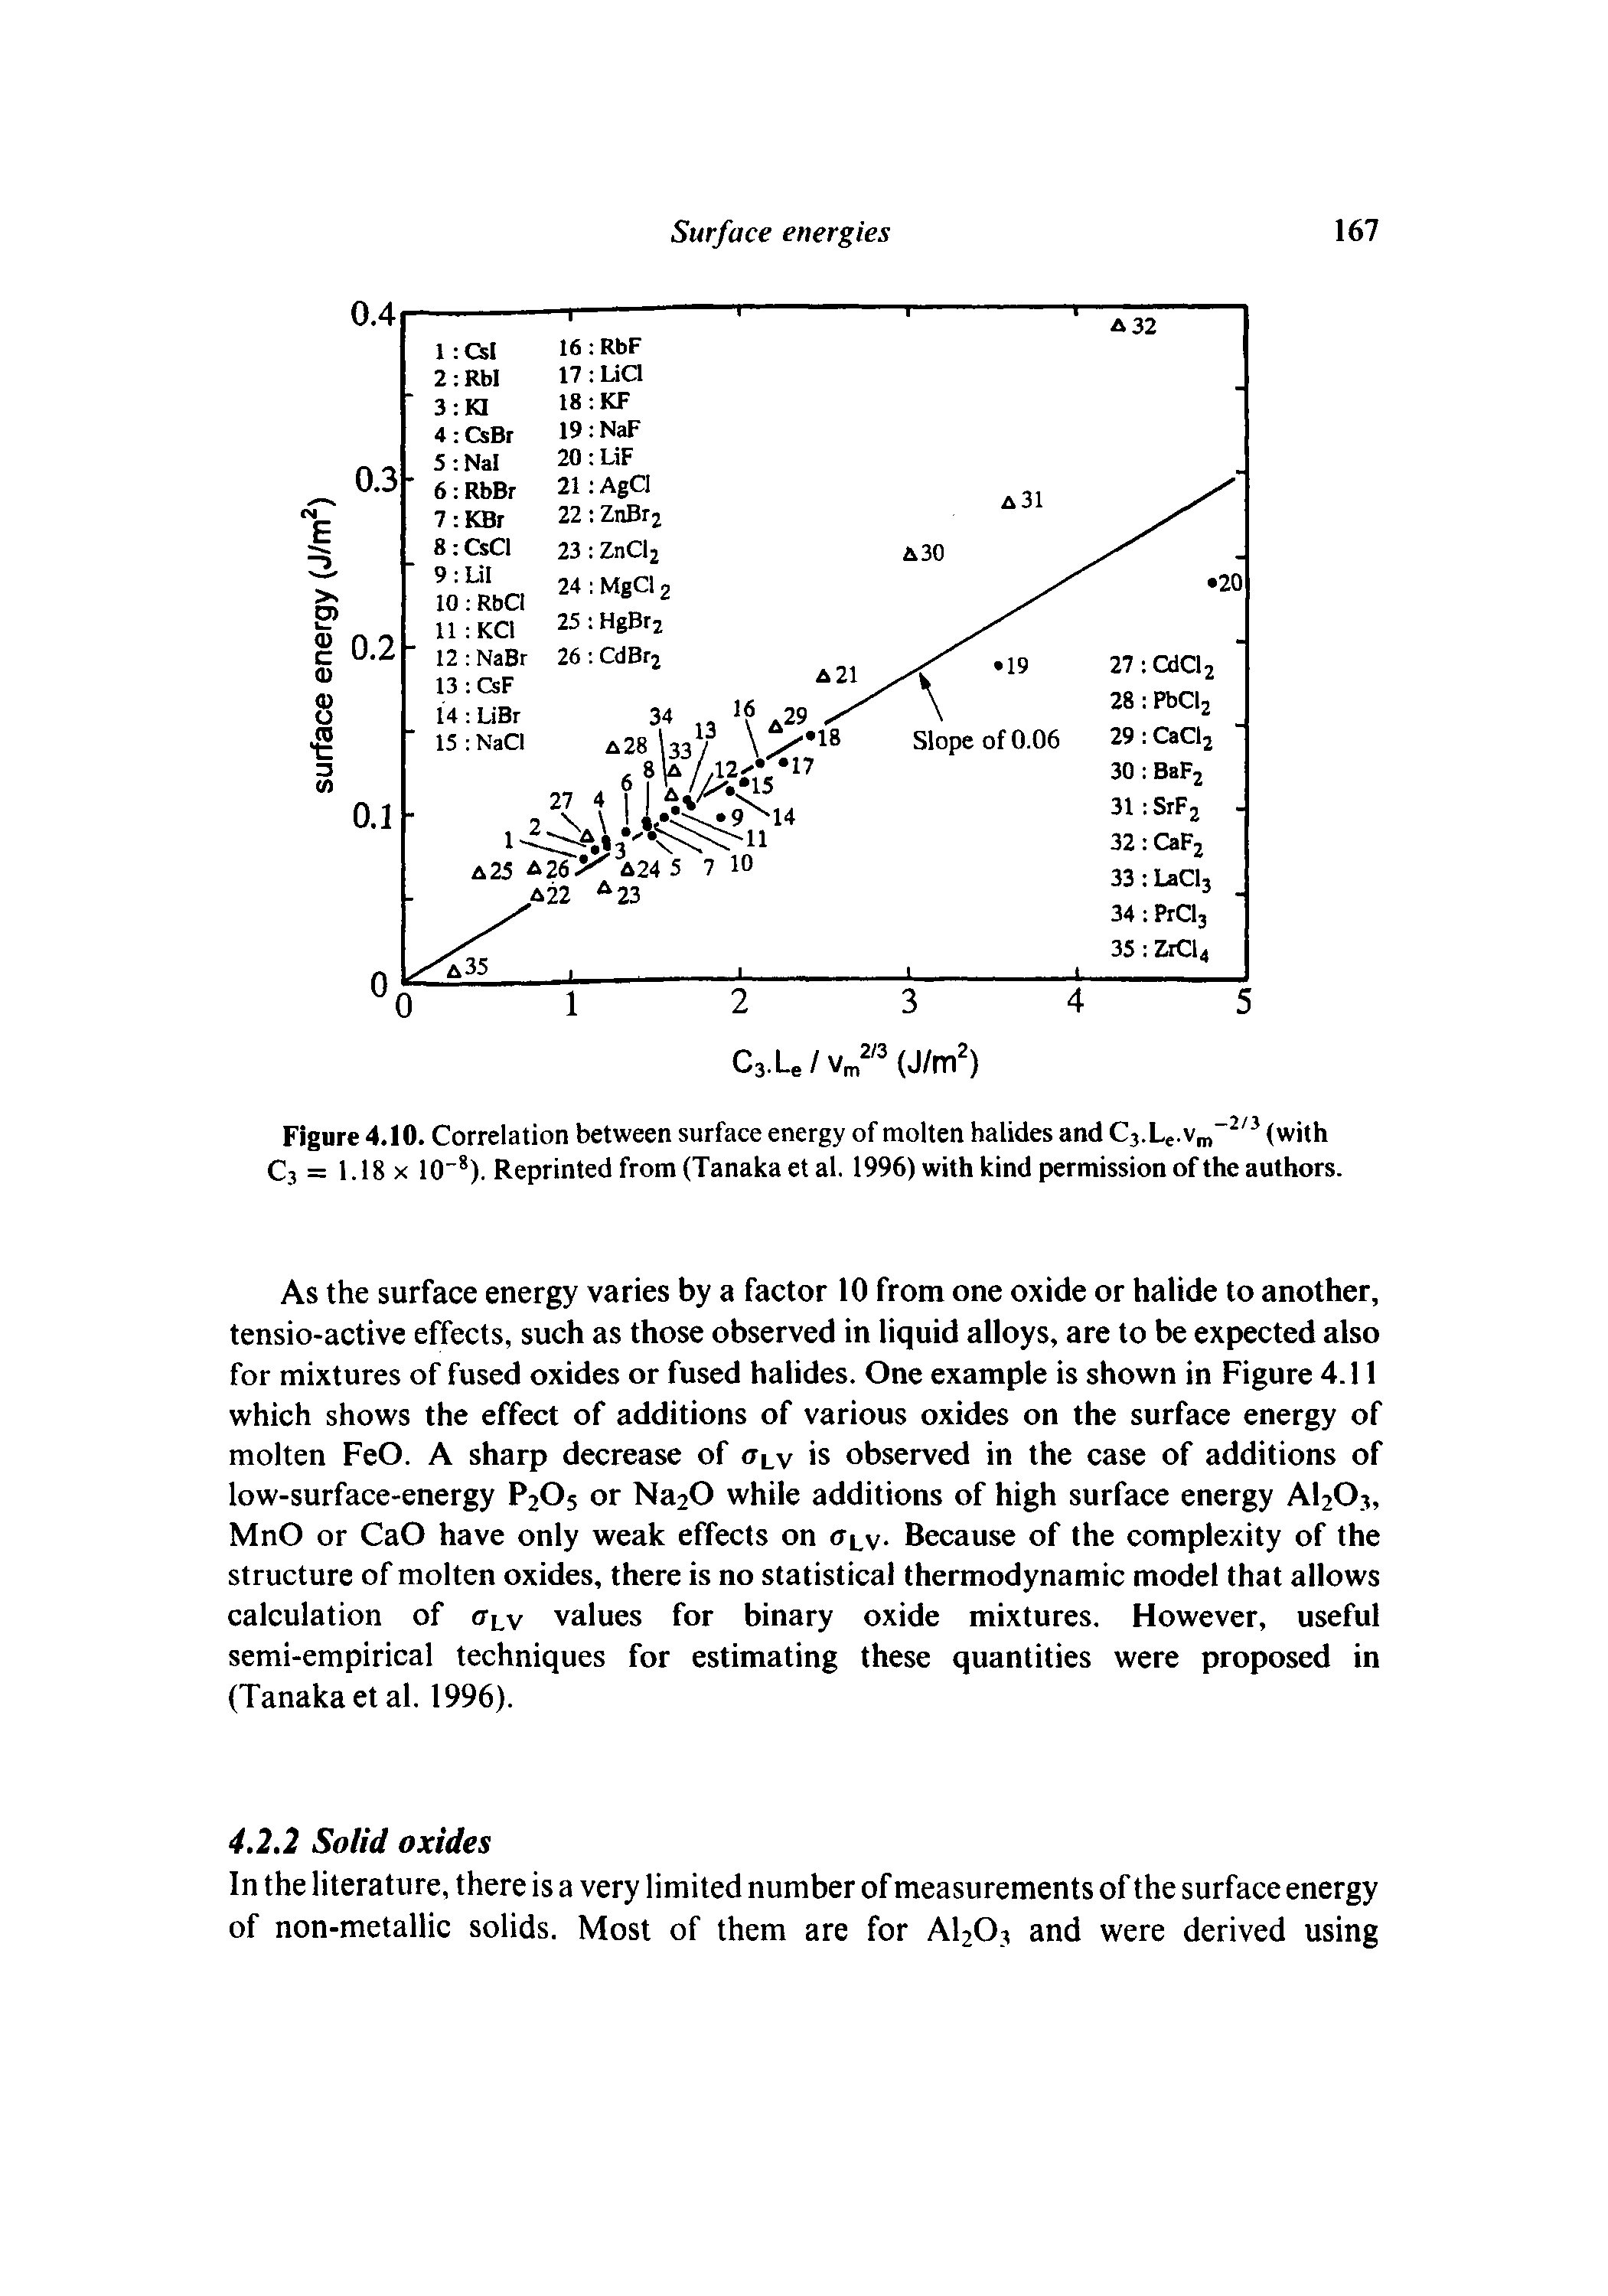 Figure 4.10. Correlation between surface energy of molten halides and C3.Le.vm 2/3 (with C3 = 1.18 x 10" ). Reprinted from (Tanaka et al. 1996) with kind permission of the authors.